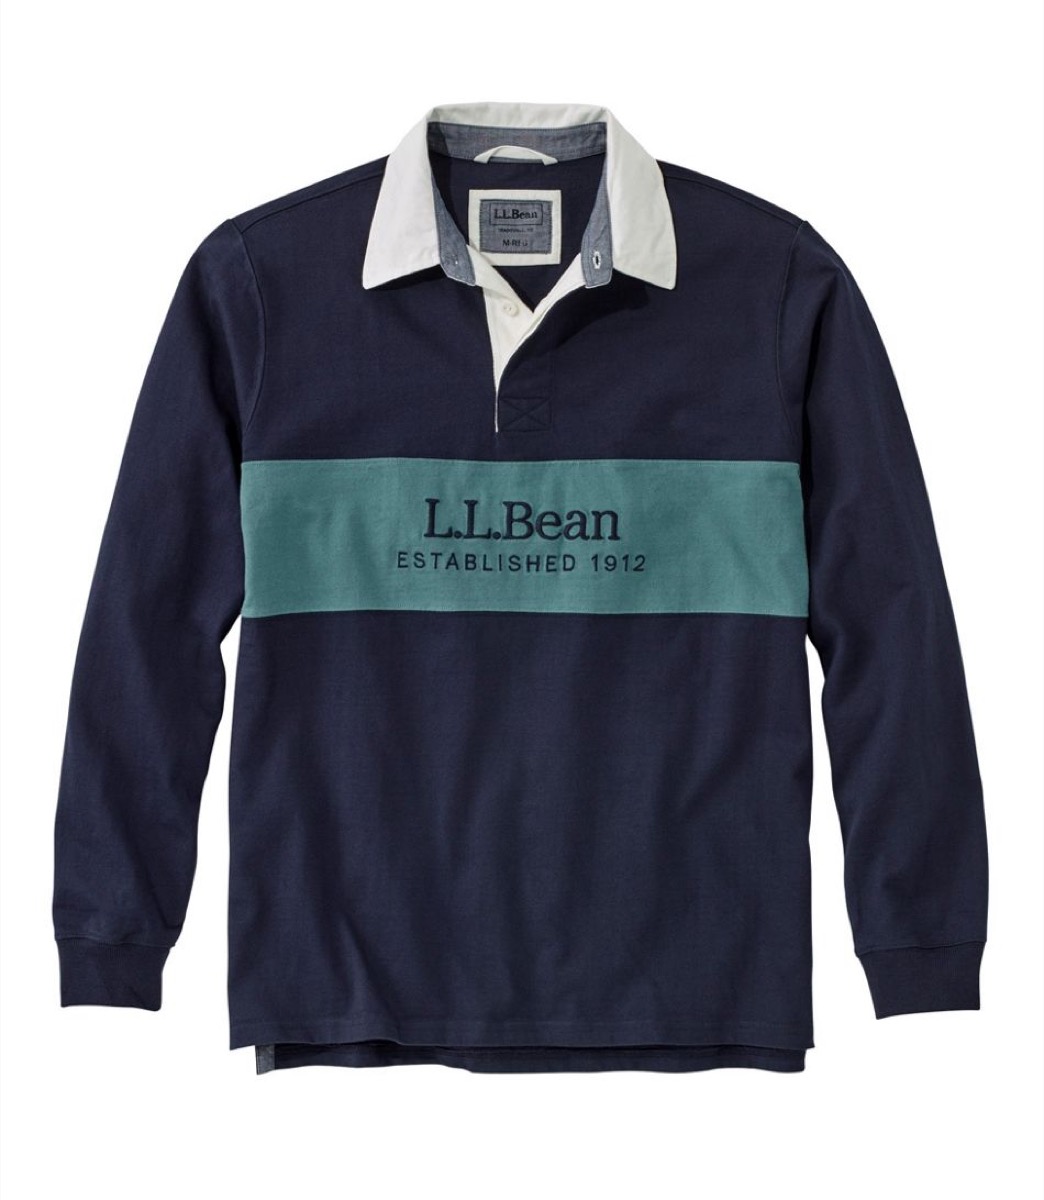 Blue L.L. Bean branded rugby